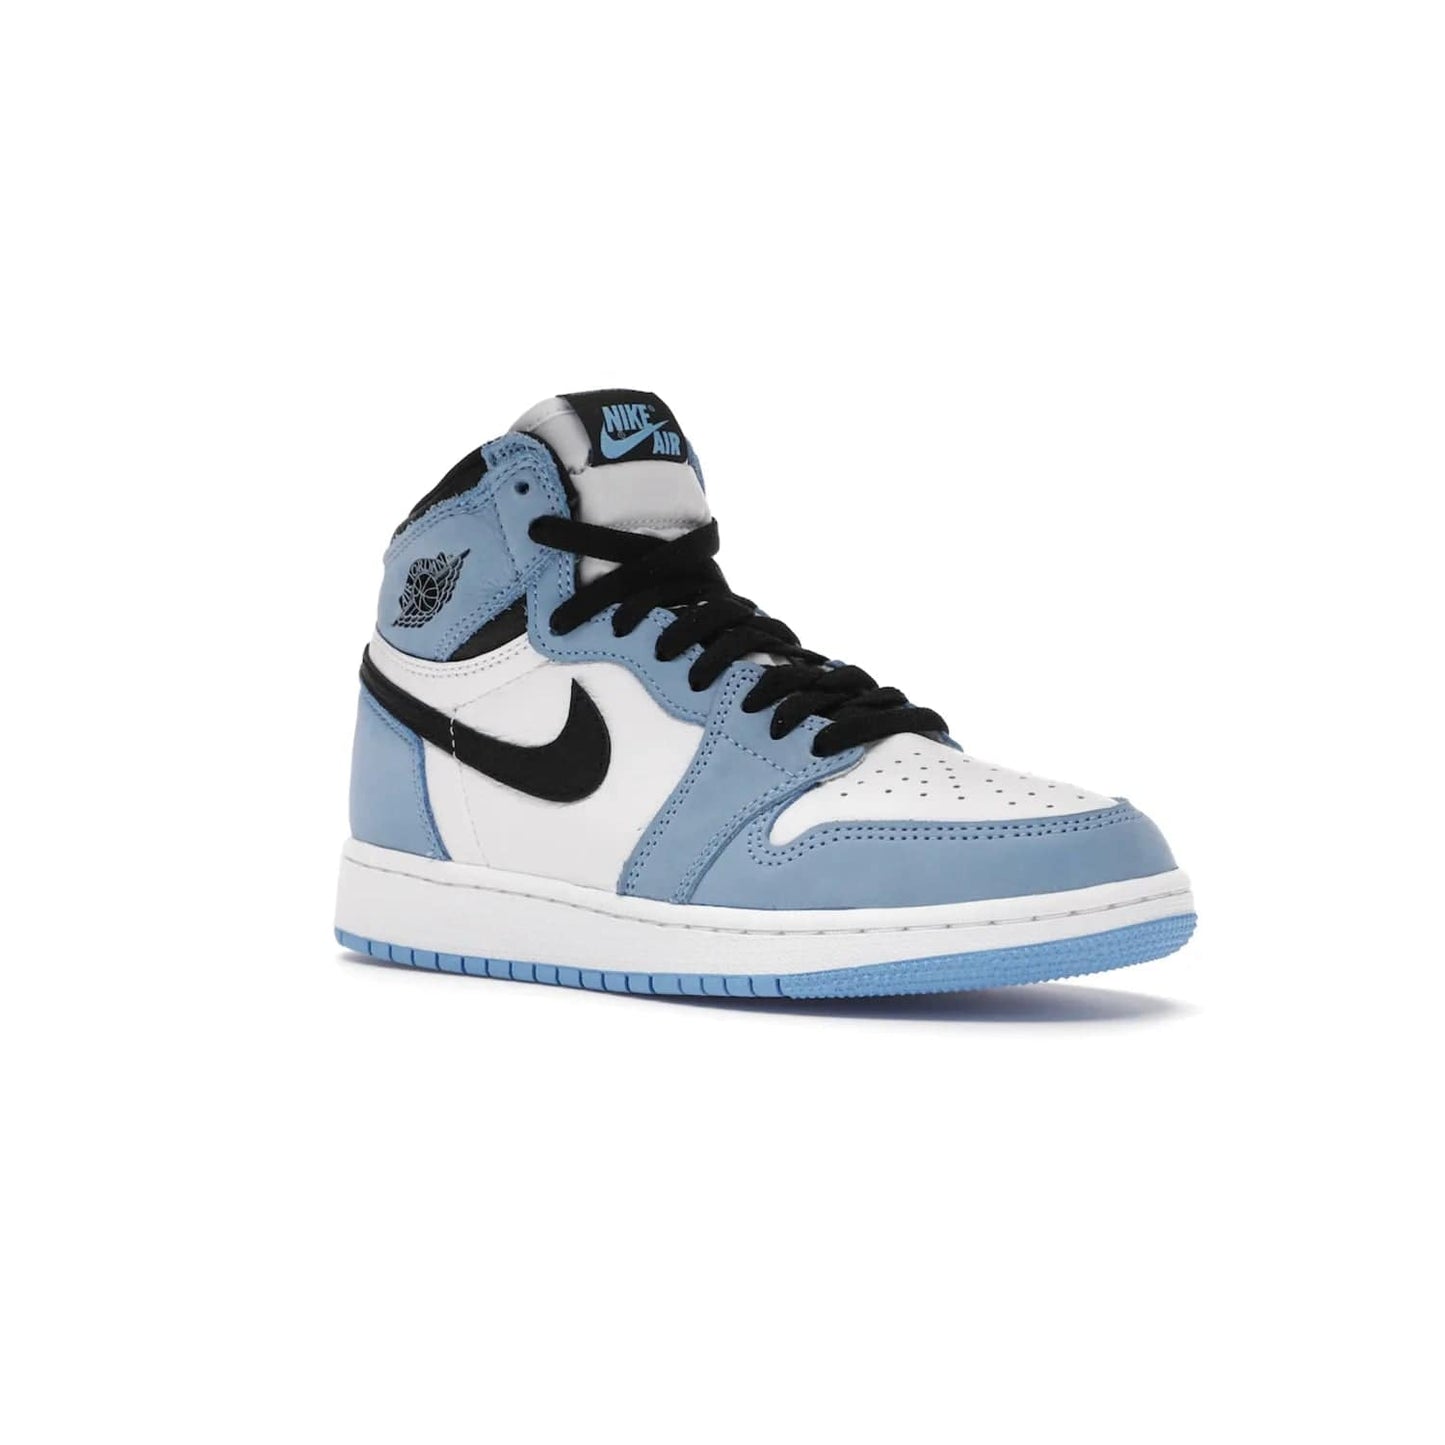 Jordan 1 Retro High White University Blue Black (GS) - Image 5 - Only at www.BallersClubKickz.com - Air Jordan 1 Retro High White University Blue Black GS: the latest offering from the iconic Air Jordan 1 line. White tumbled leather upper with University Blue overlays and black detailing. University Blue outsole and white midsole. March 6 release.